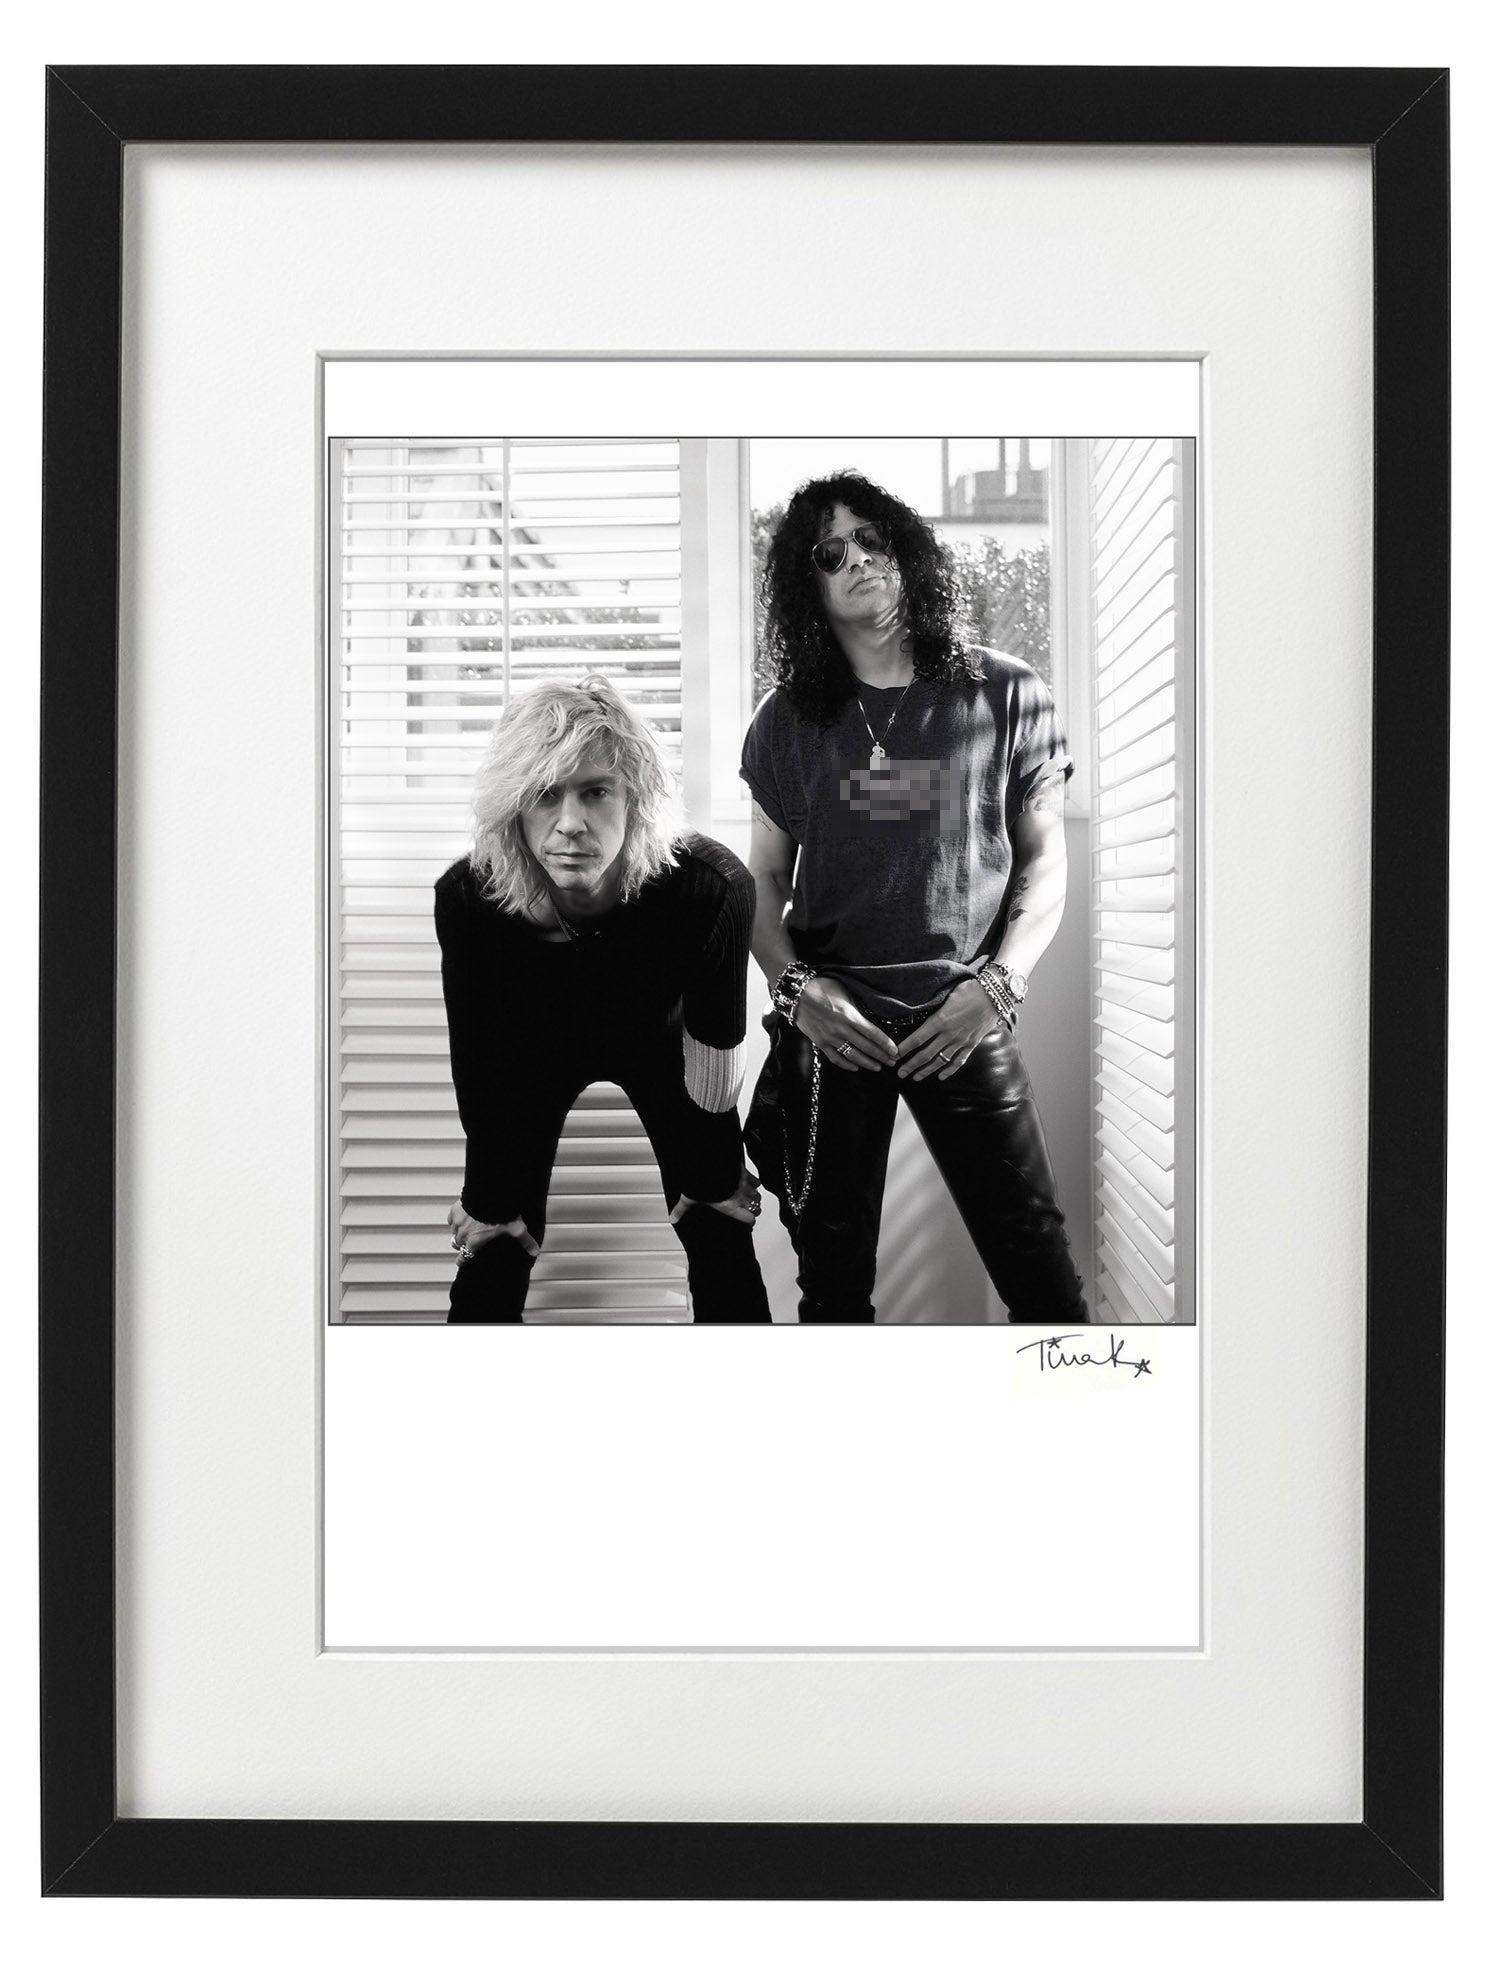 Guns N' Roses duo Duff McKagan and Slash in their Velvet Revolver days. Framed black and white print by Tina K Photography.